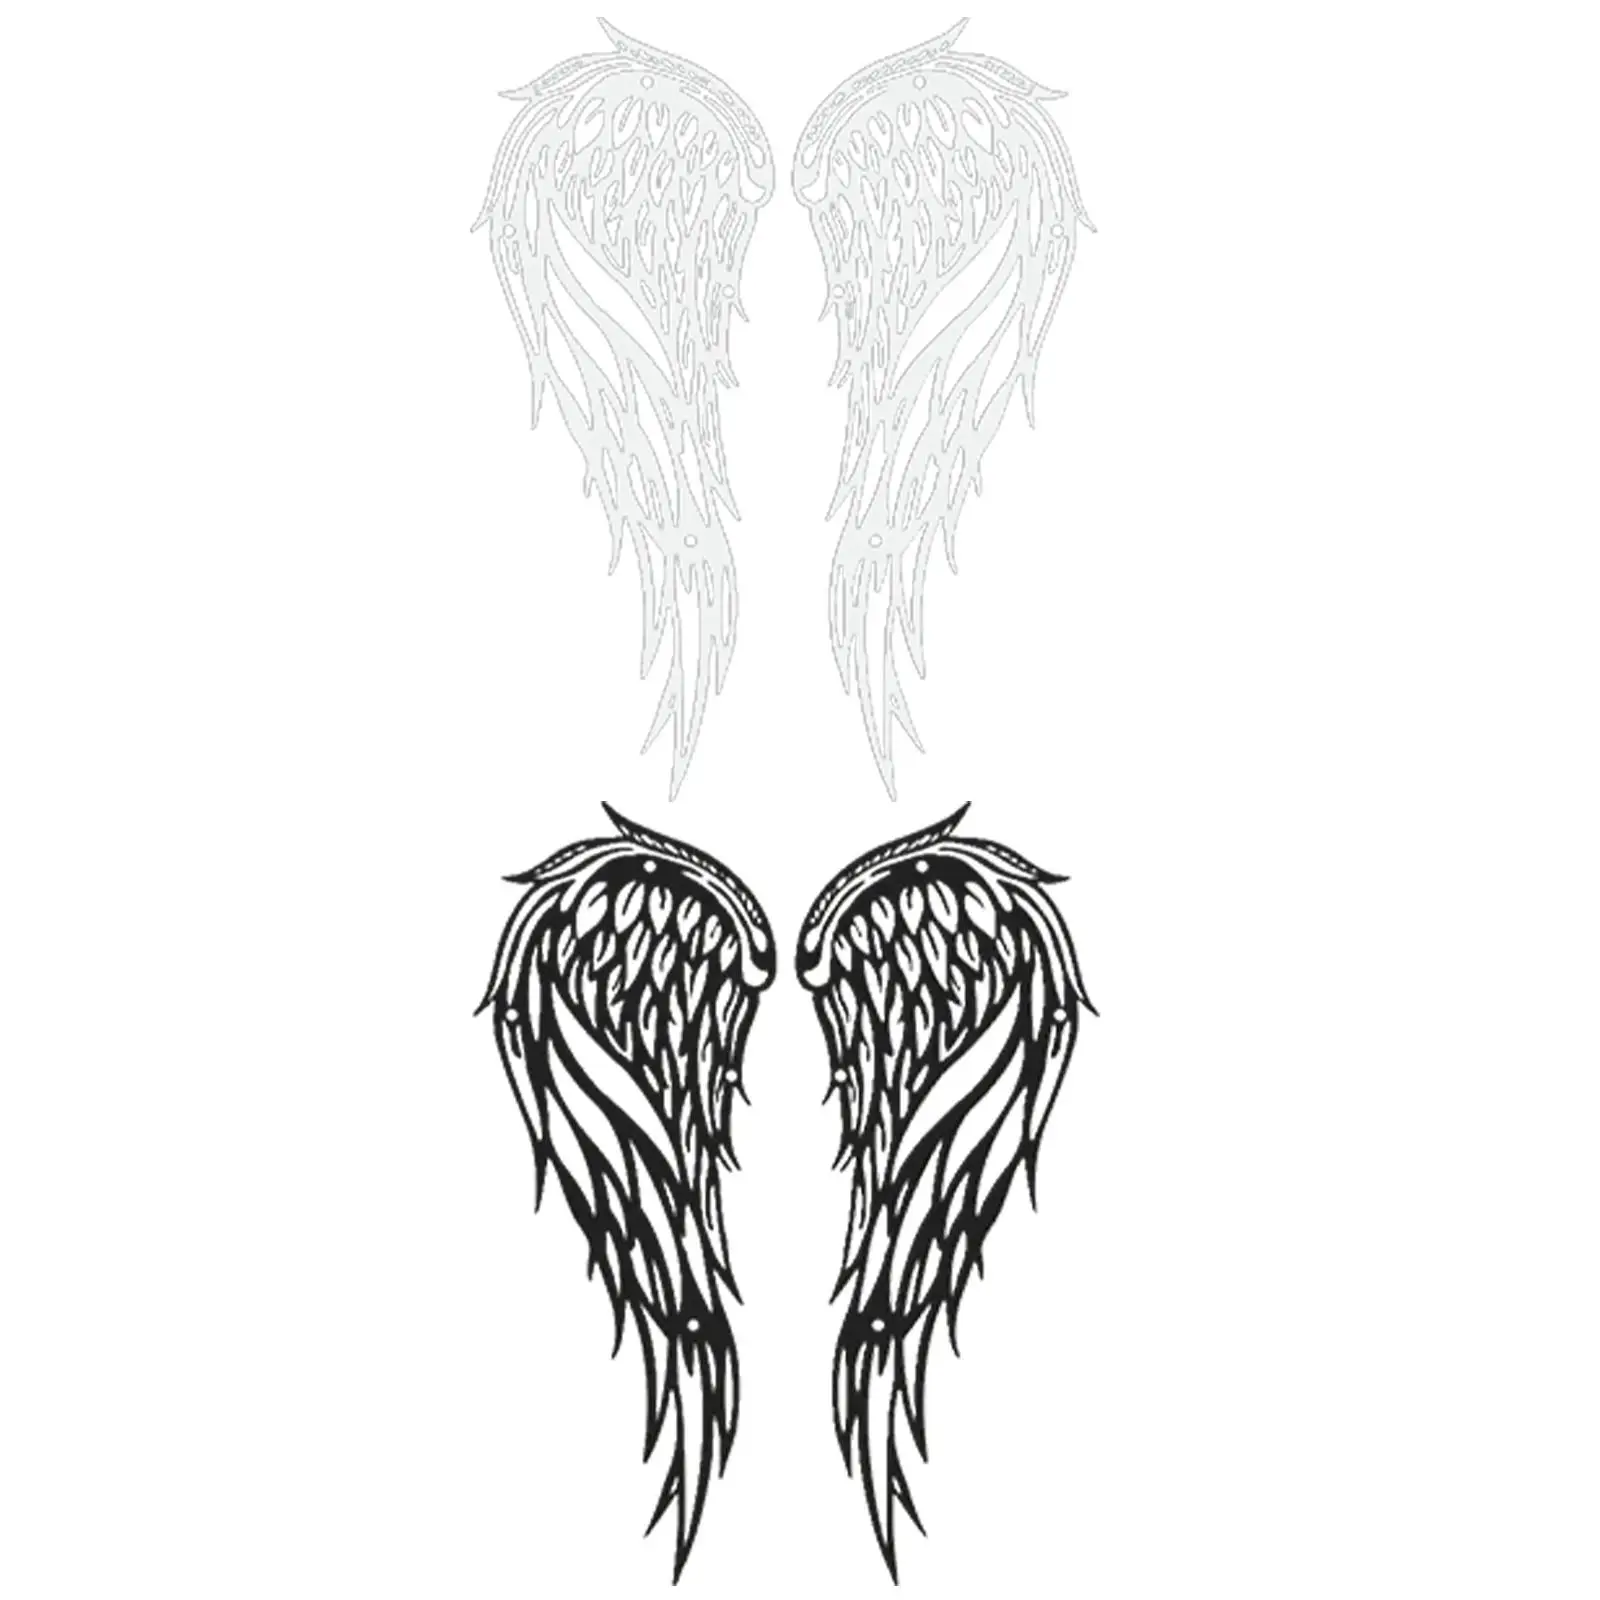 

Rustic Pair of Angel Wing Crafts Retro Style Decorative Engraved Metal Wall Art Sculpture for Statue Indoor Outdoor Living Room